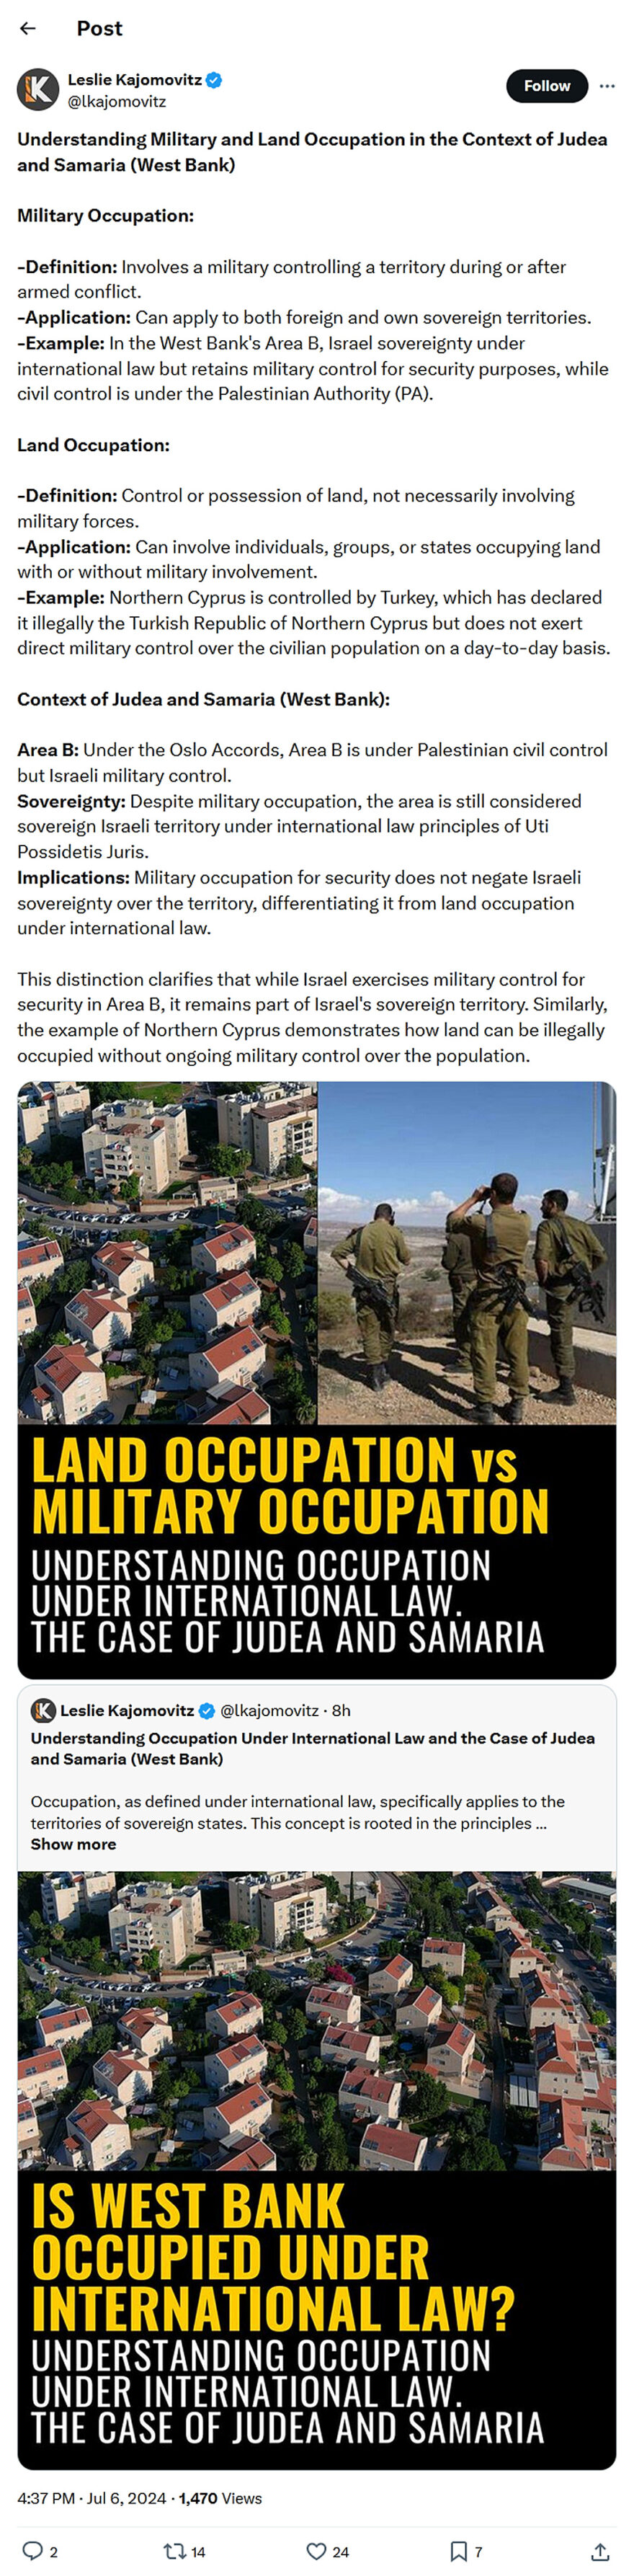 Leslie Kajomovitz-tweet-6July2024-Understanding Military and Land Occupation in the Context of Judea and Samaria